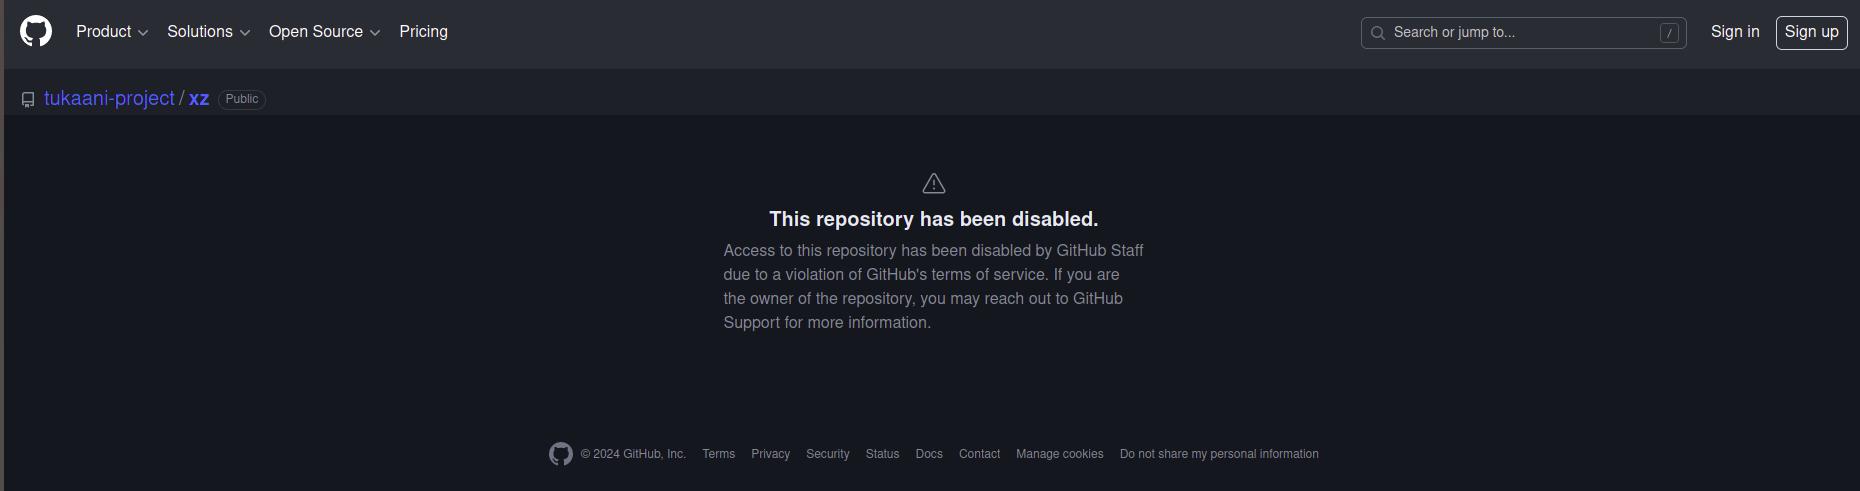 A warning message from GitHub that the repository has been disabled due to a violation of terms of service.